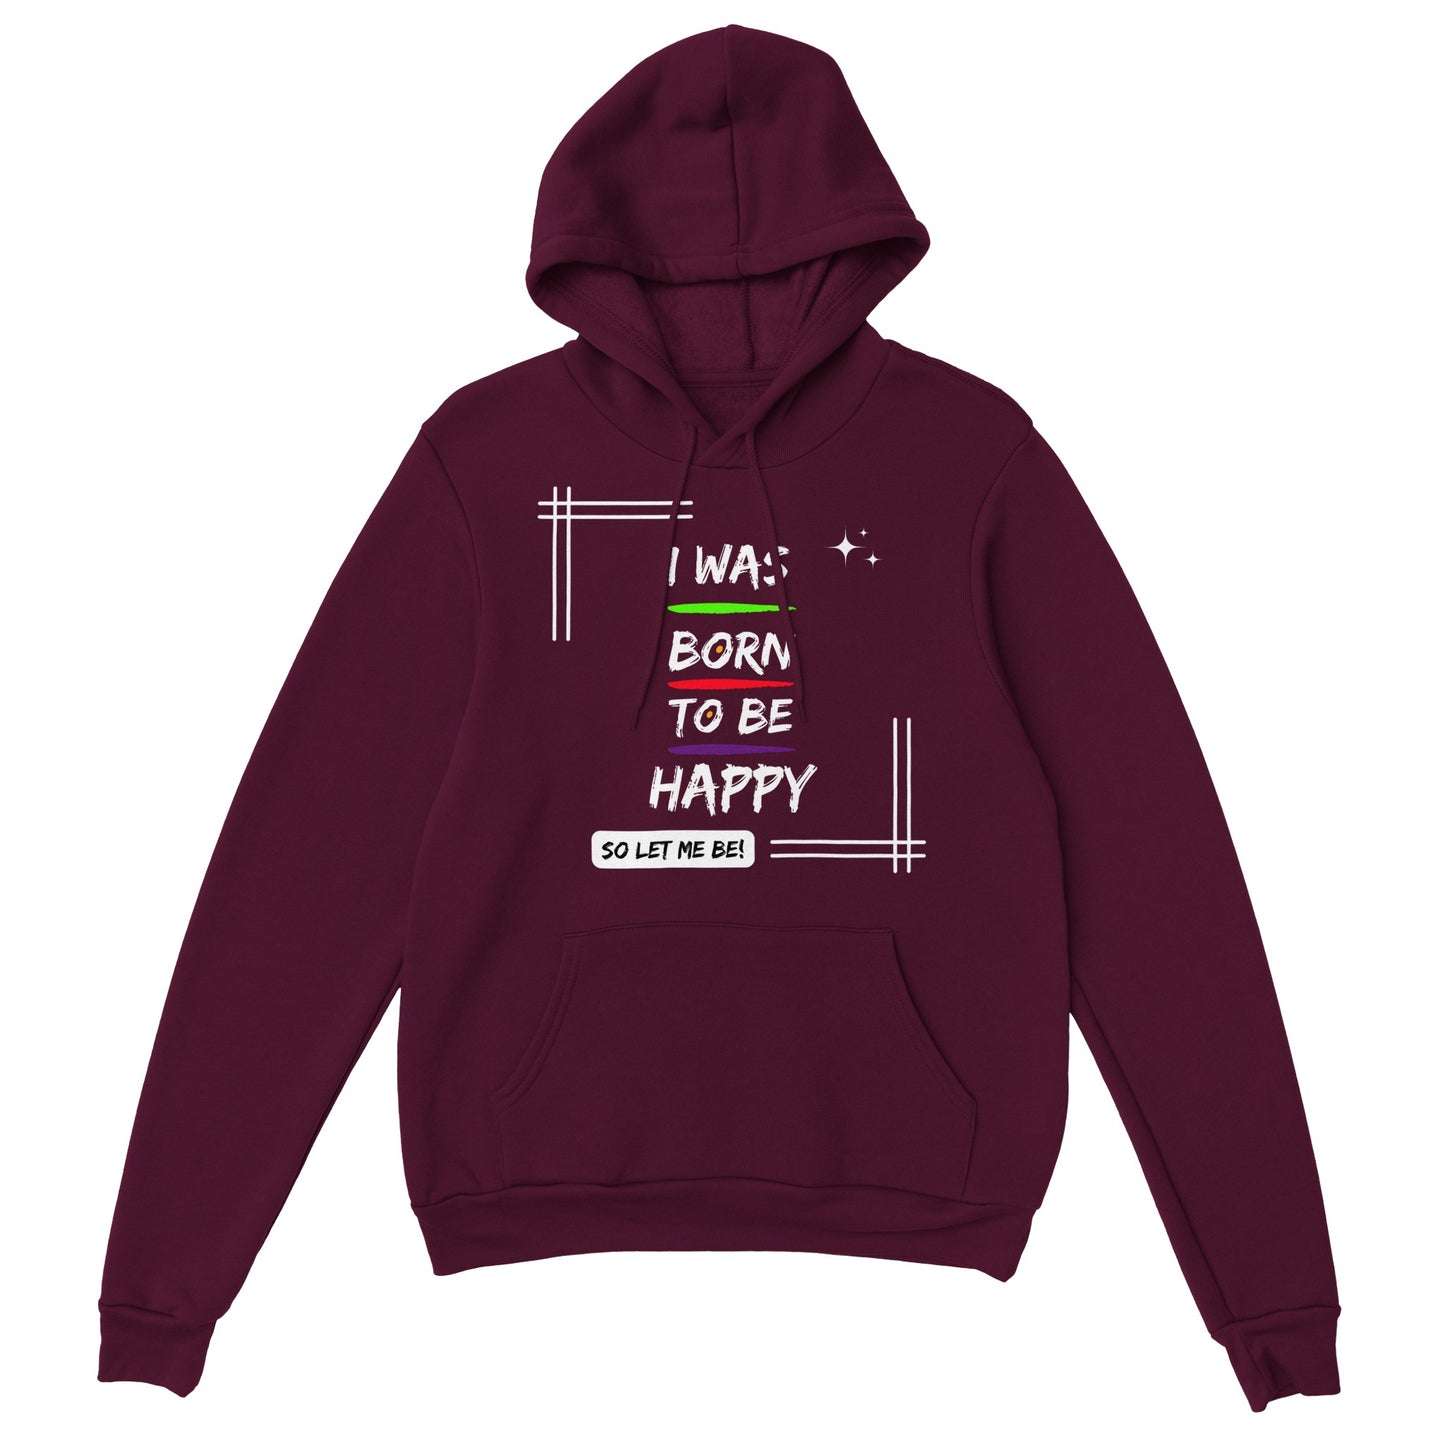 "I was born to be happy, so let me be! - Inspirational Quote Unisex Hoodie